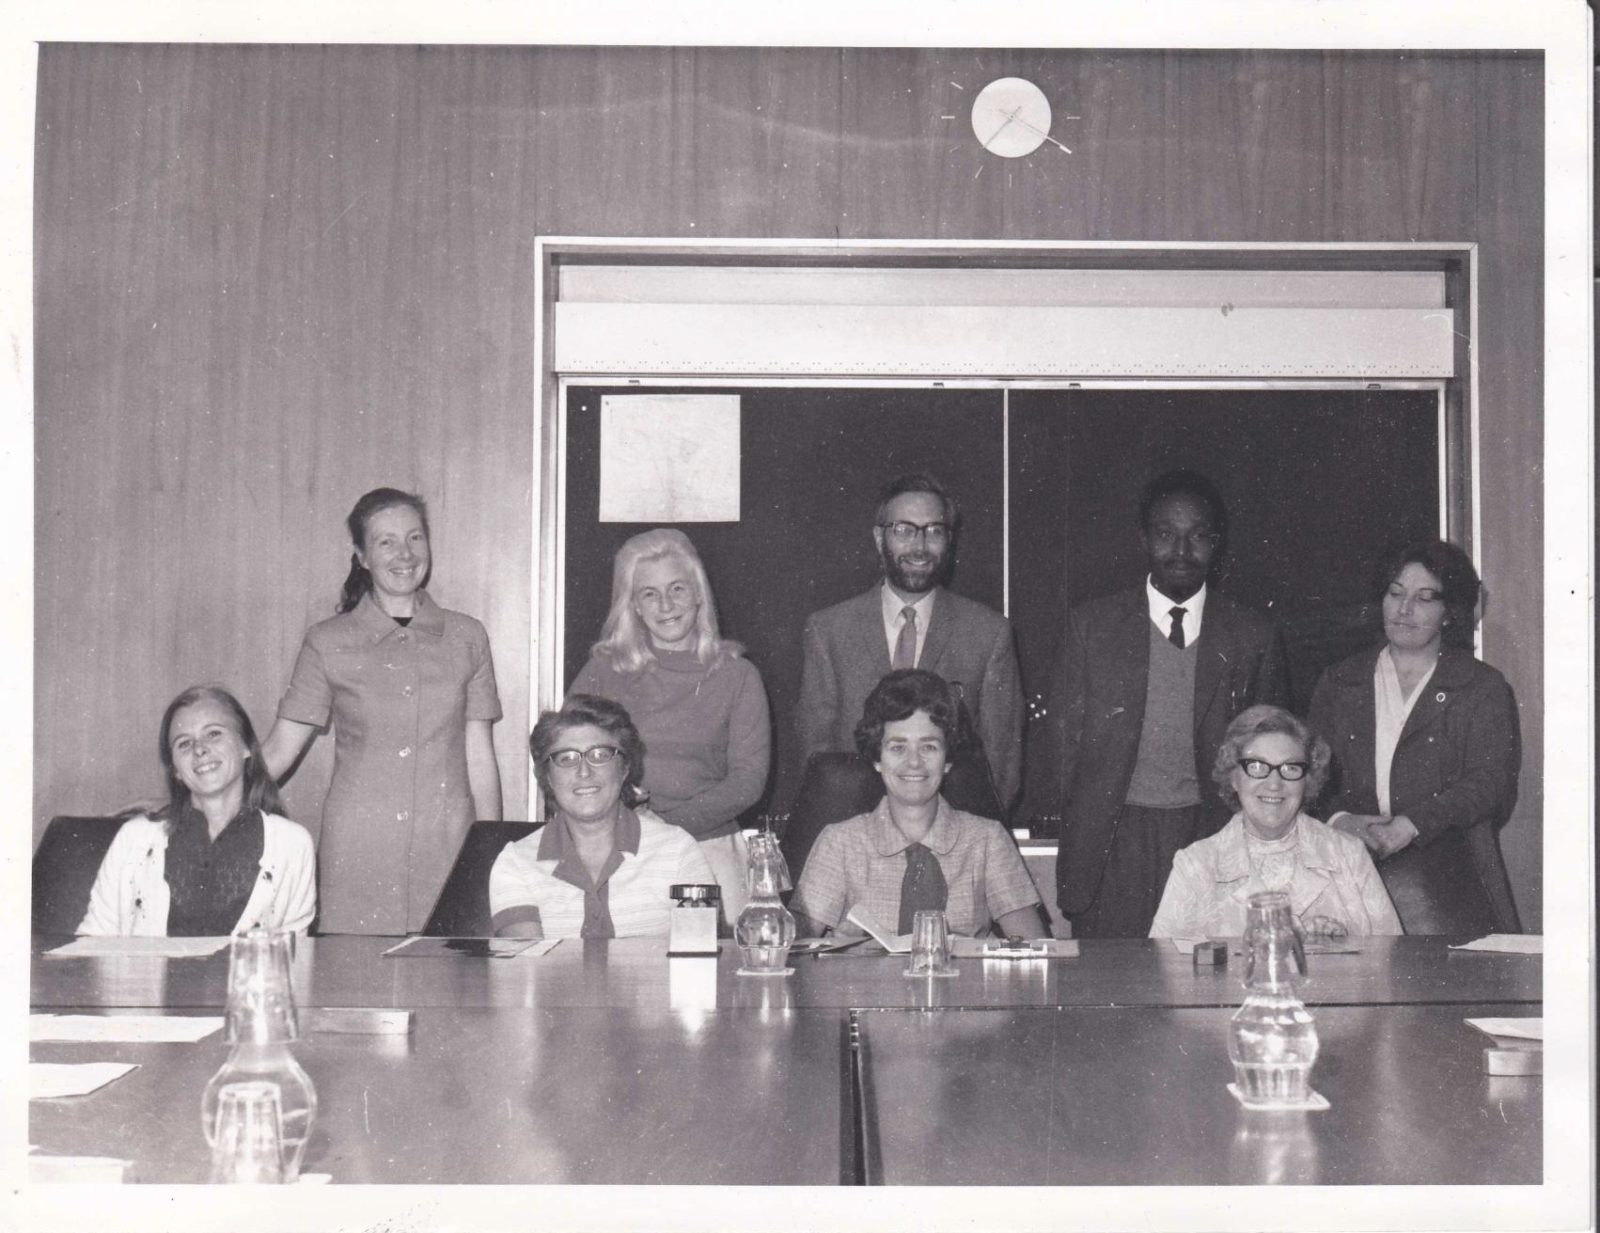 Ulric pictured in the back row, second from the right.